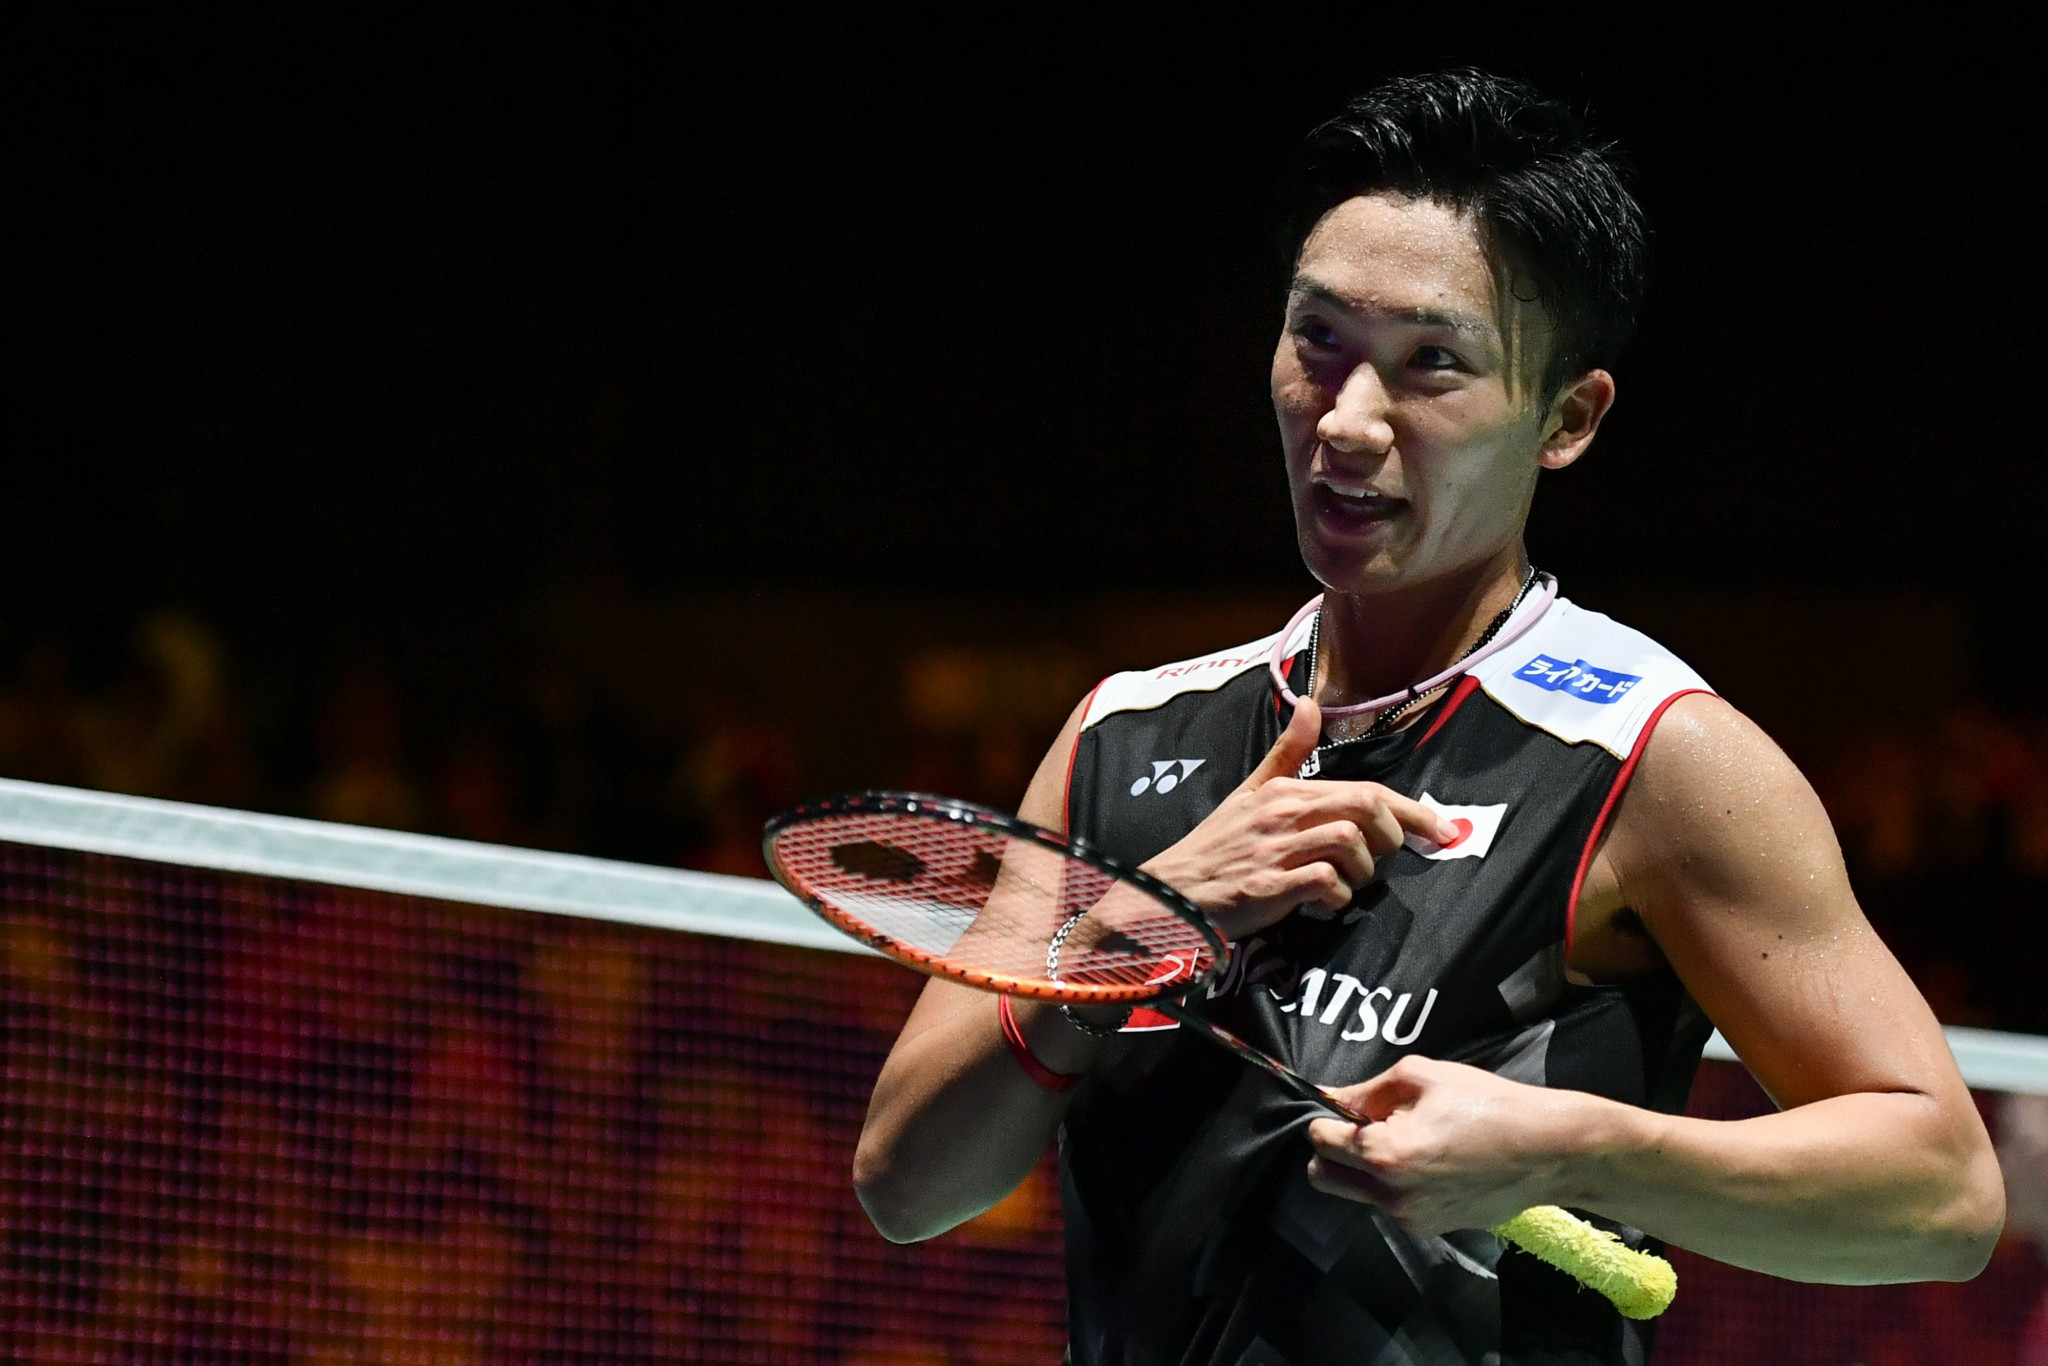 Kento Momota continued serene progression to reach the quarter-finals ©Getty Images